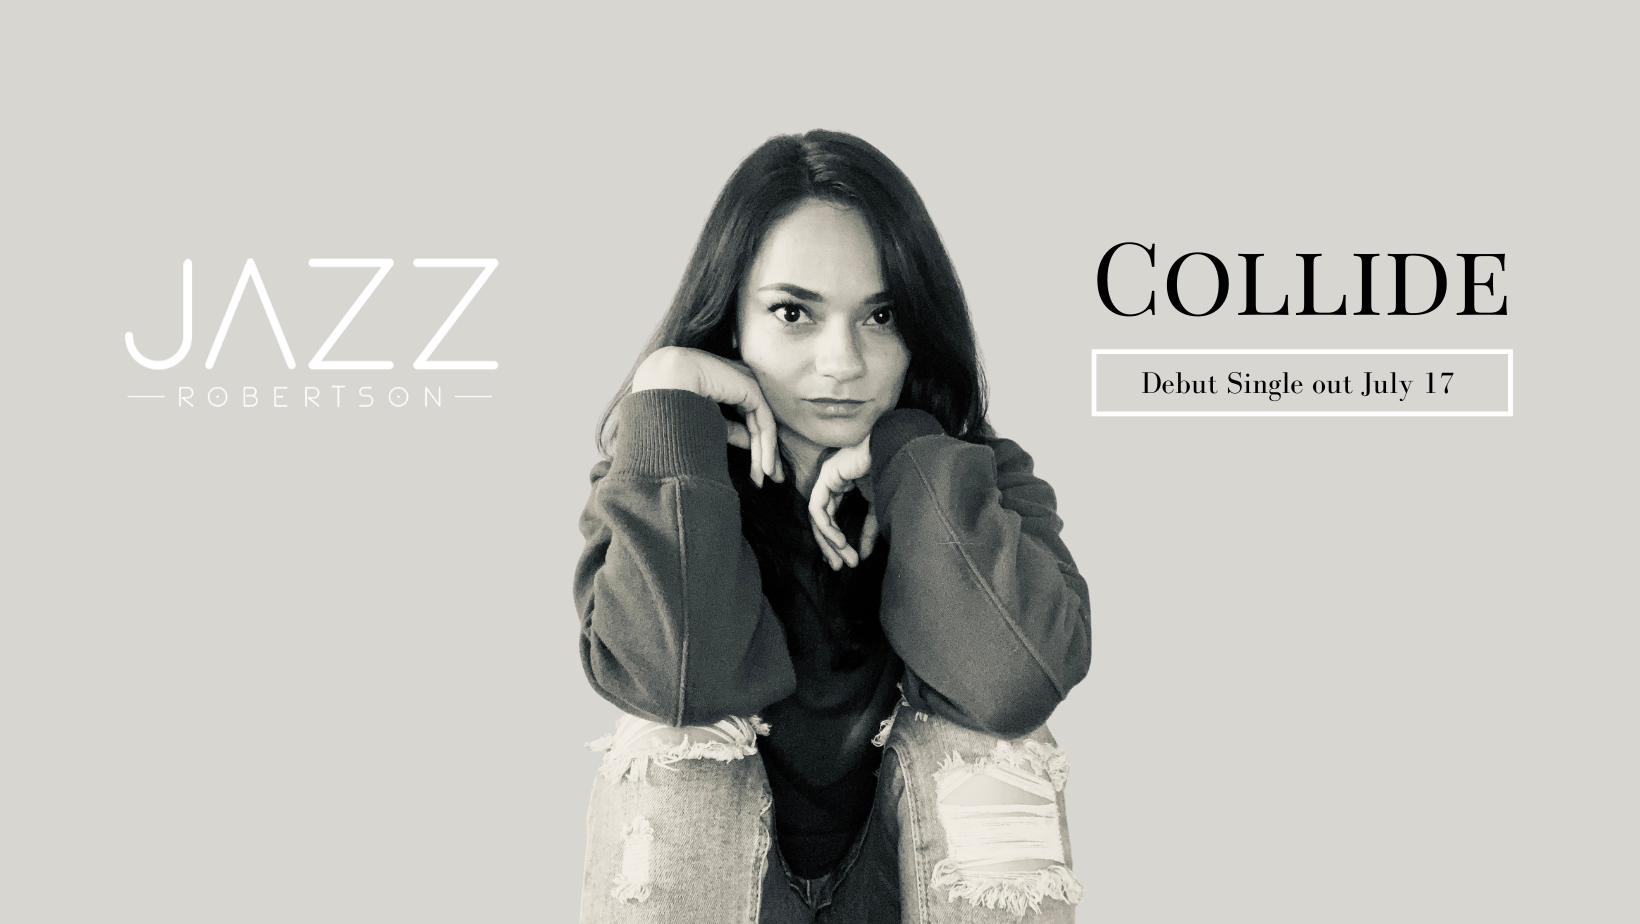 Jazz Robertson is a multi-talented vocalist and songwriter who releases ‘Collide’